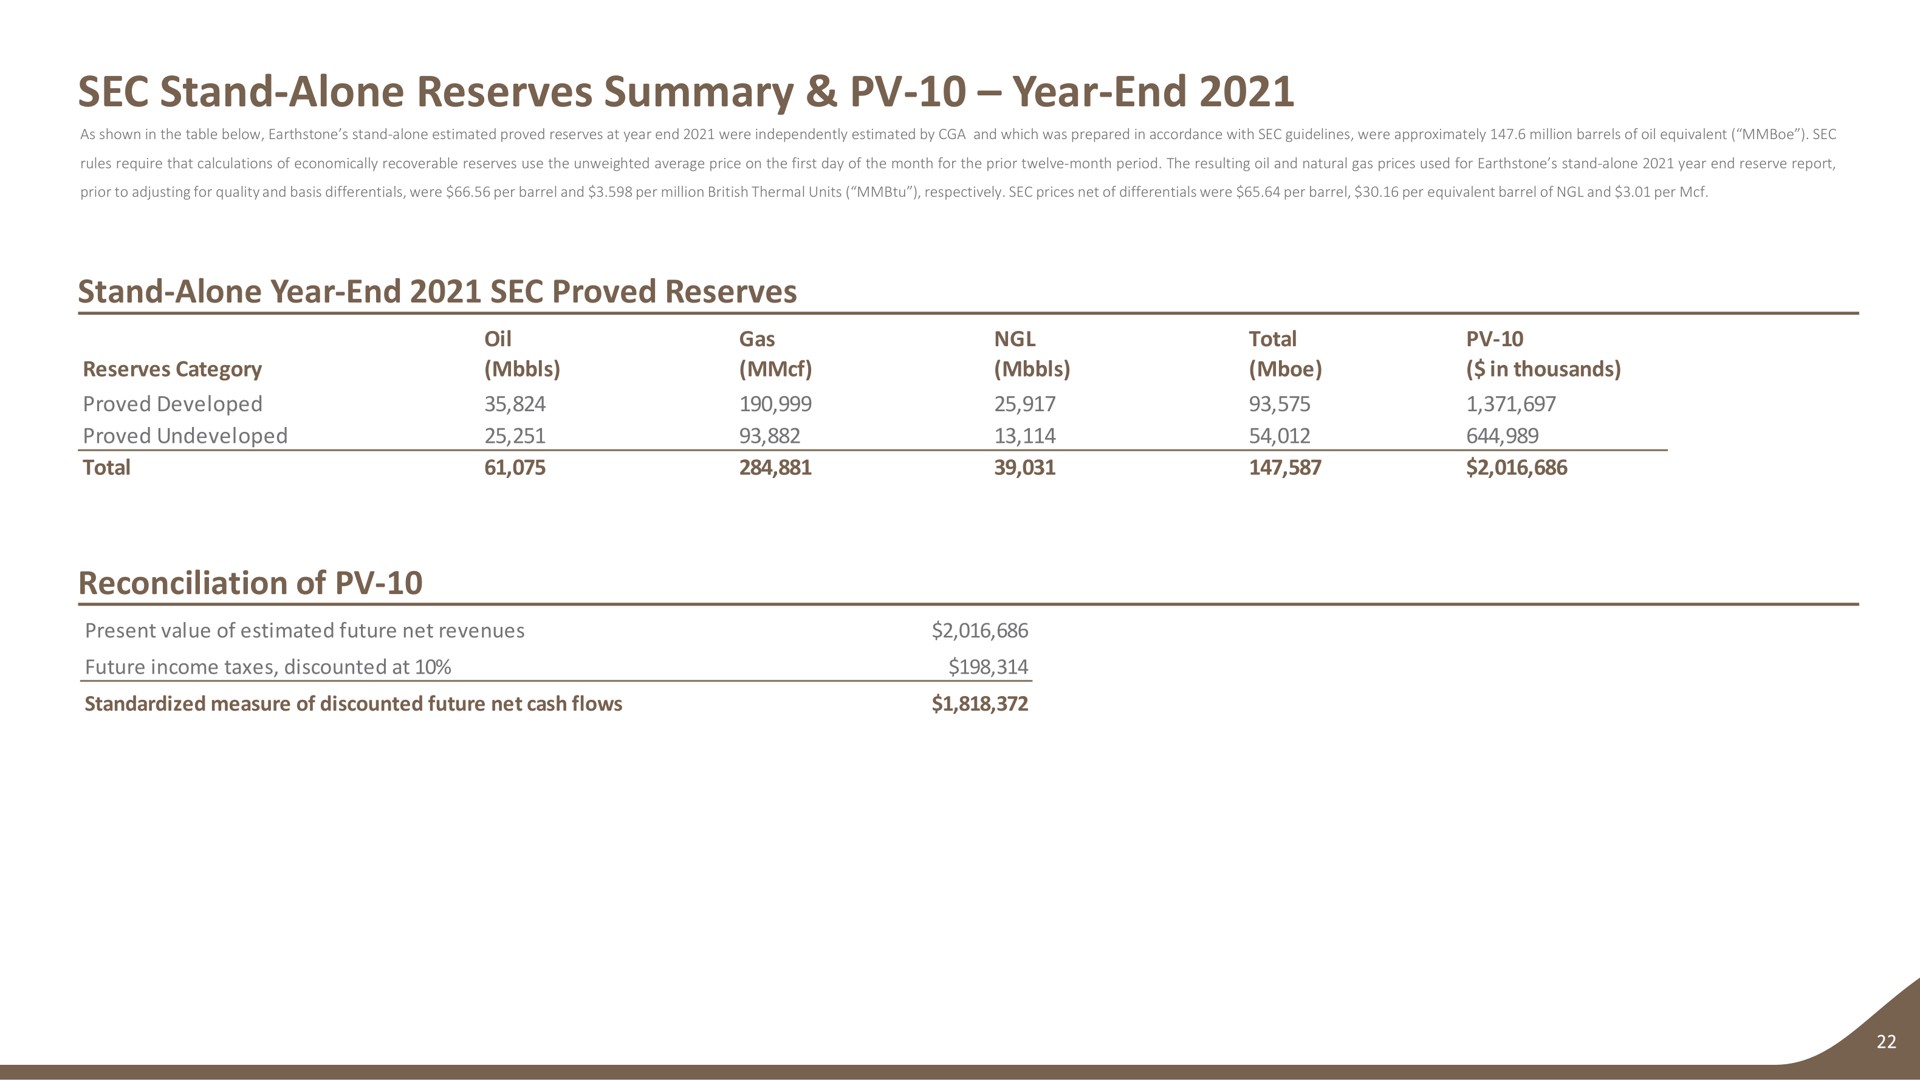 sec stand alone reserves summary year end stand alone year end sec proved reserves reconciliation of category total sin thousands | Earthstone Energy